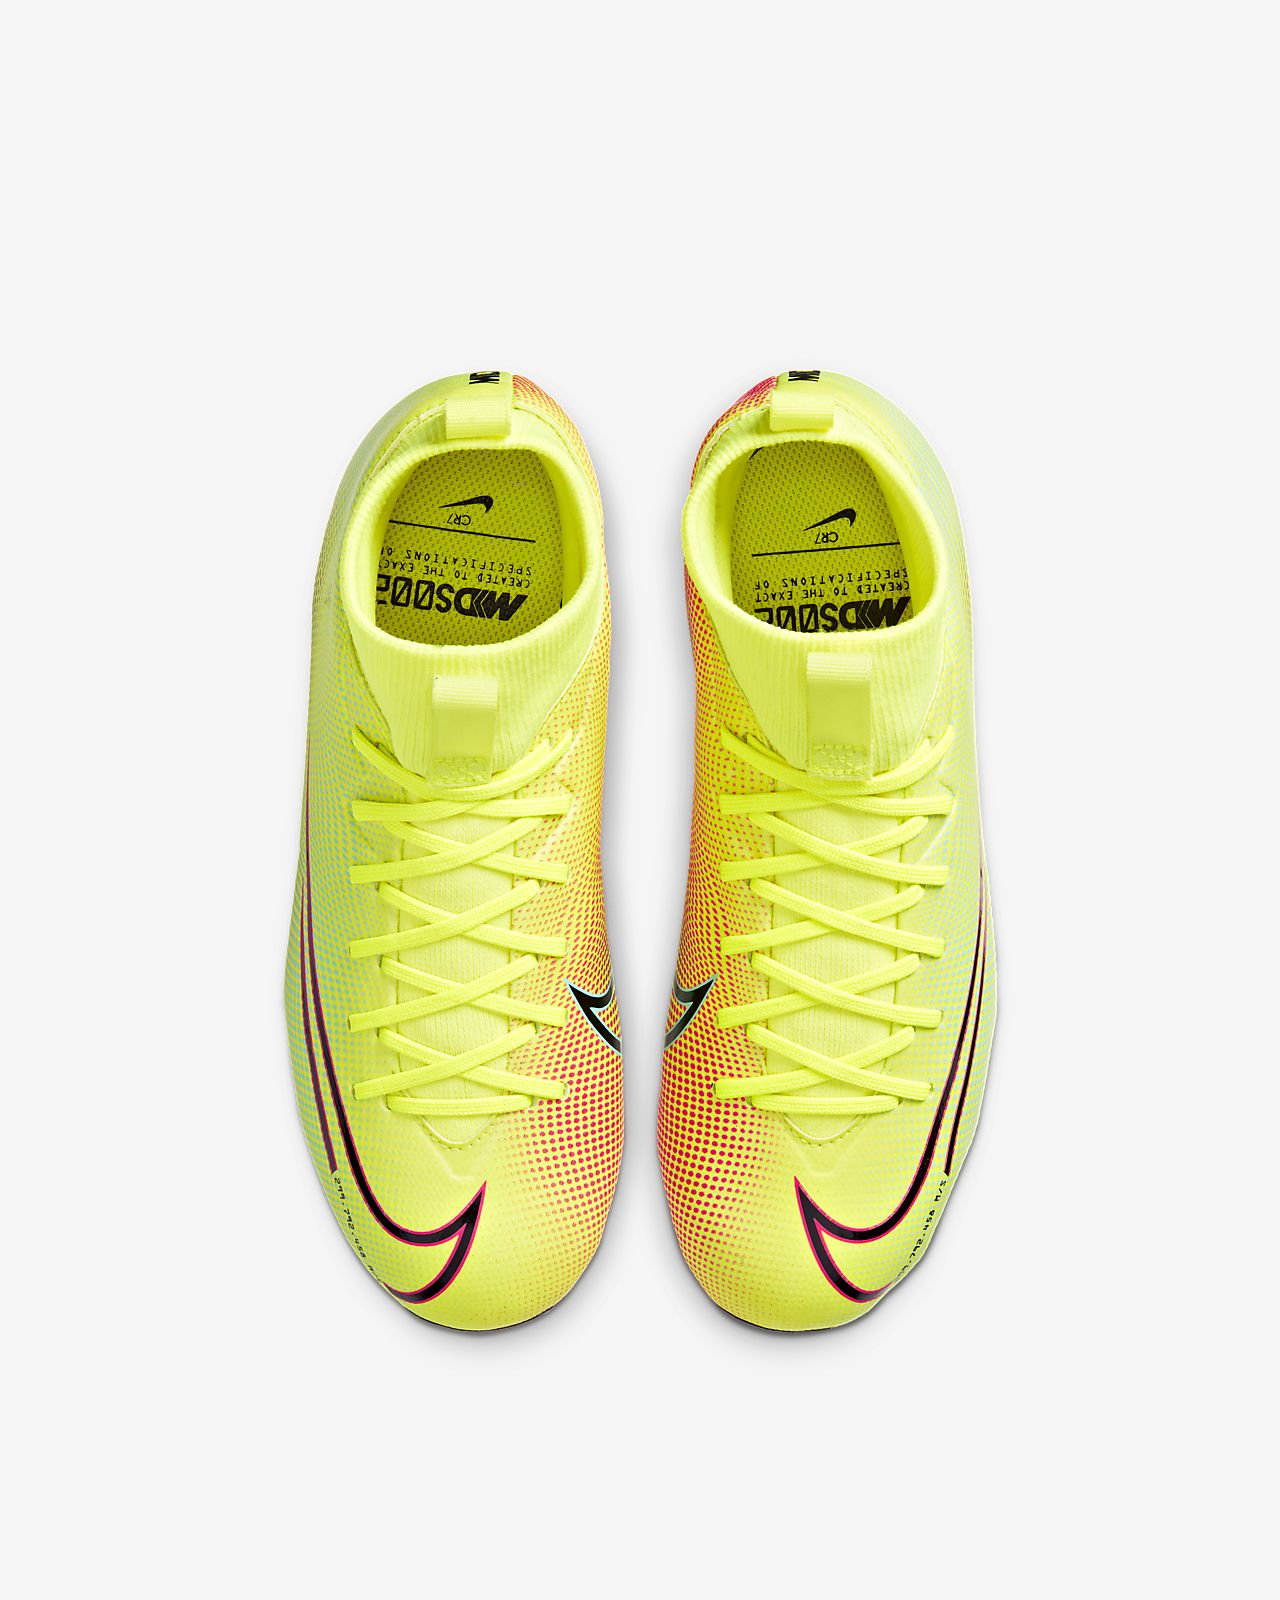 Nike Mercurial SuperflyX 7 Academy MDS TF Turf Shoes.